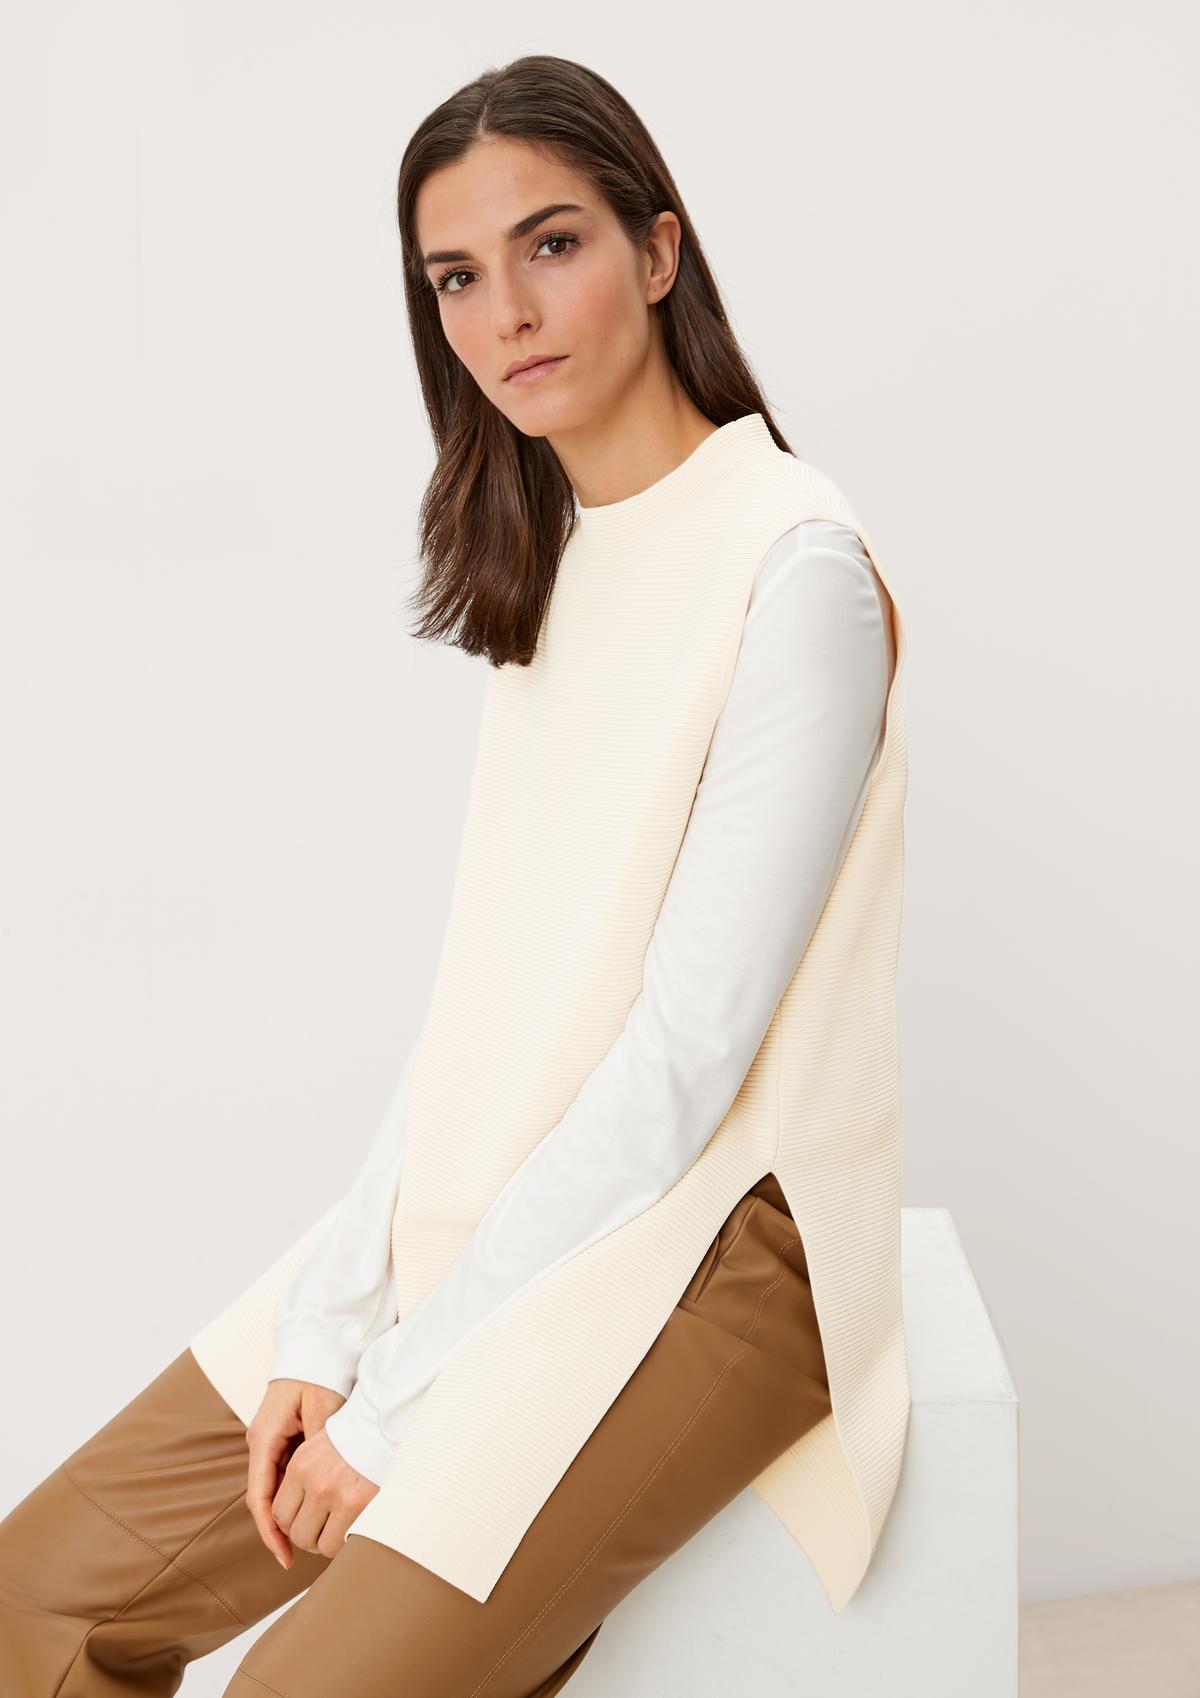 s.Oliver Sleeveless jumper with a textured pattern